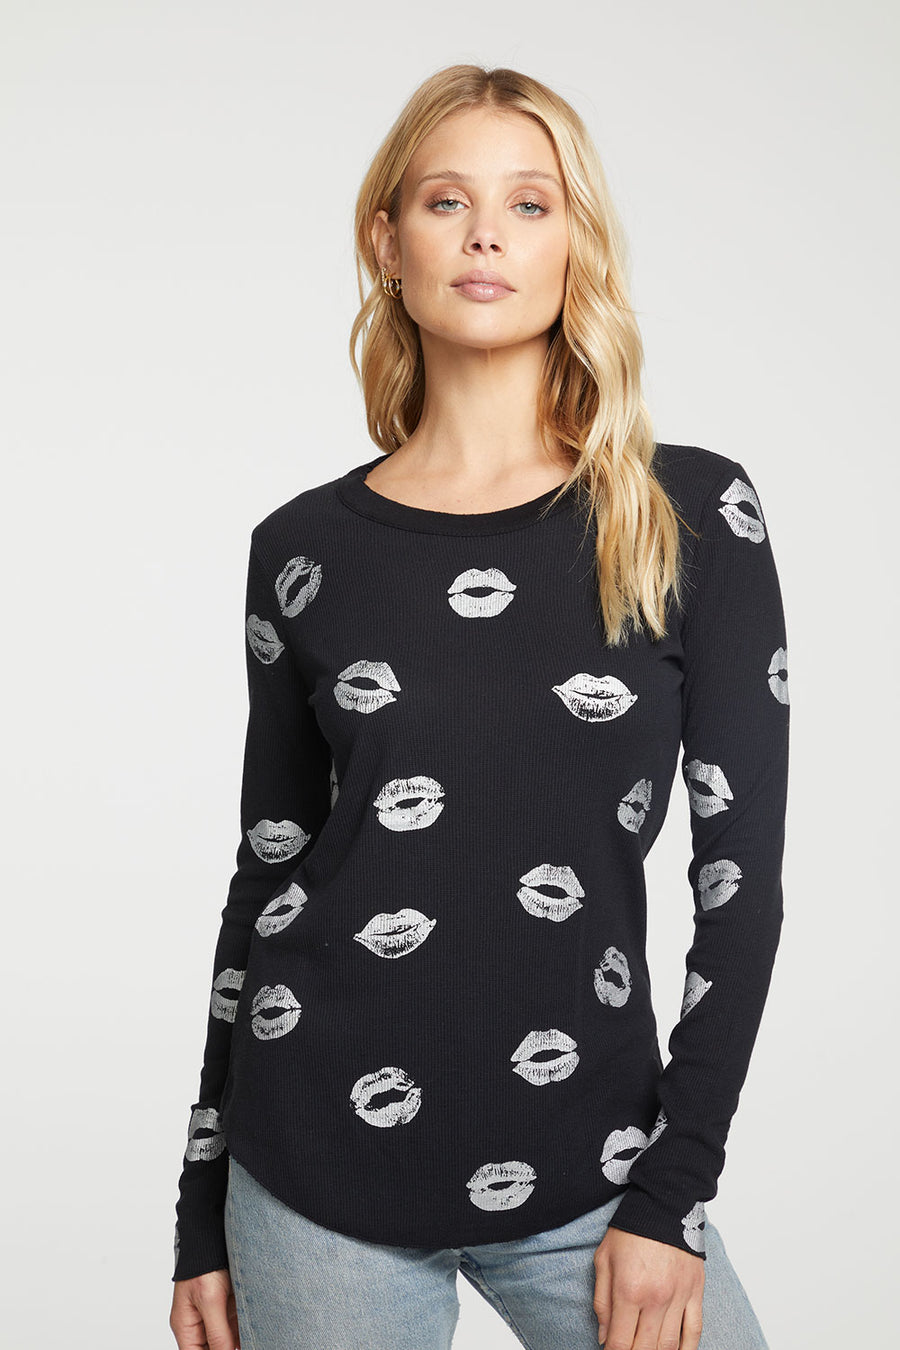 Silver Lips WOMENS - chaserbrand